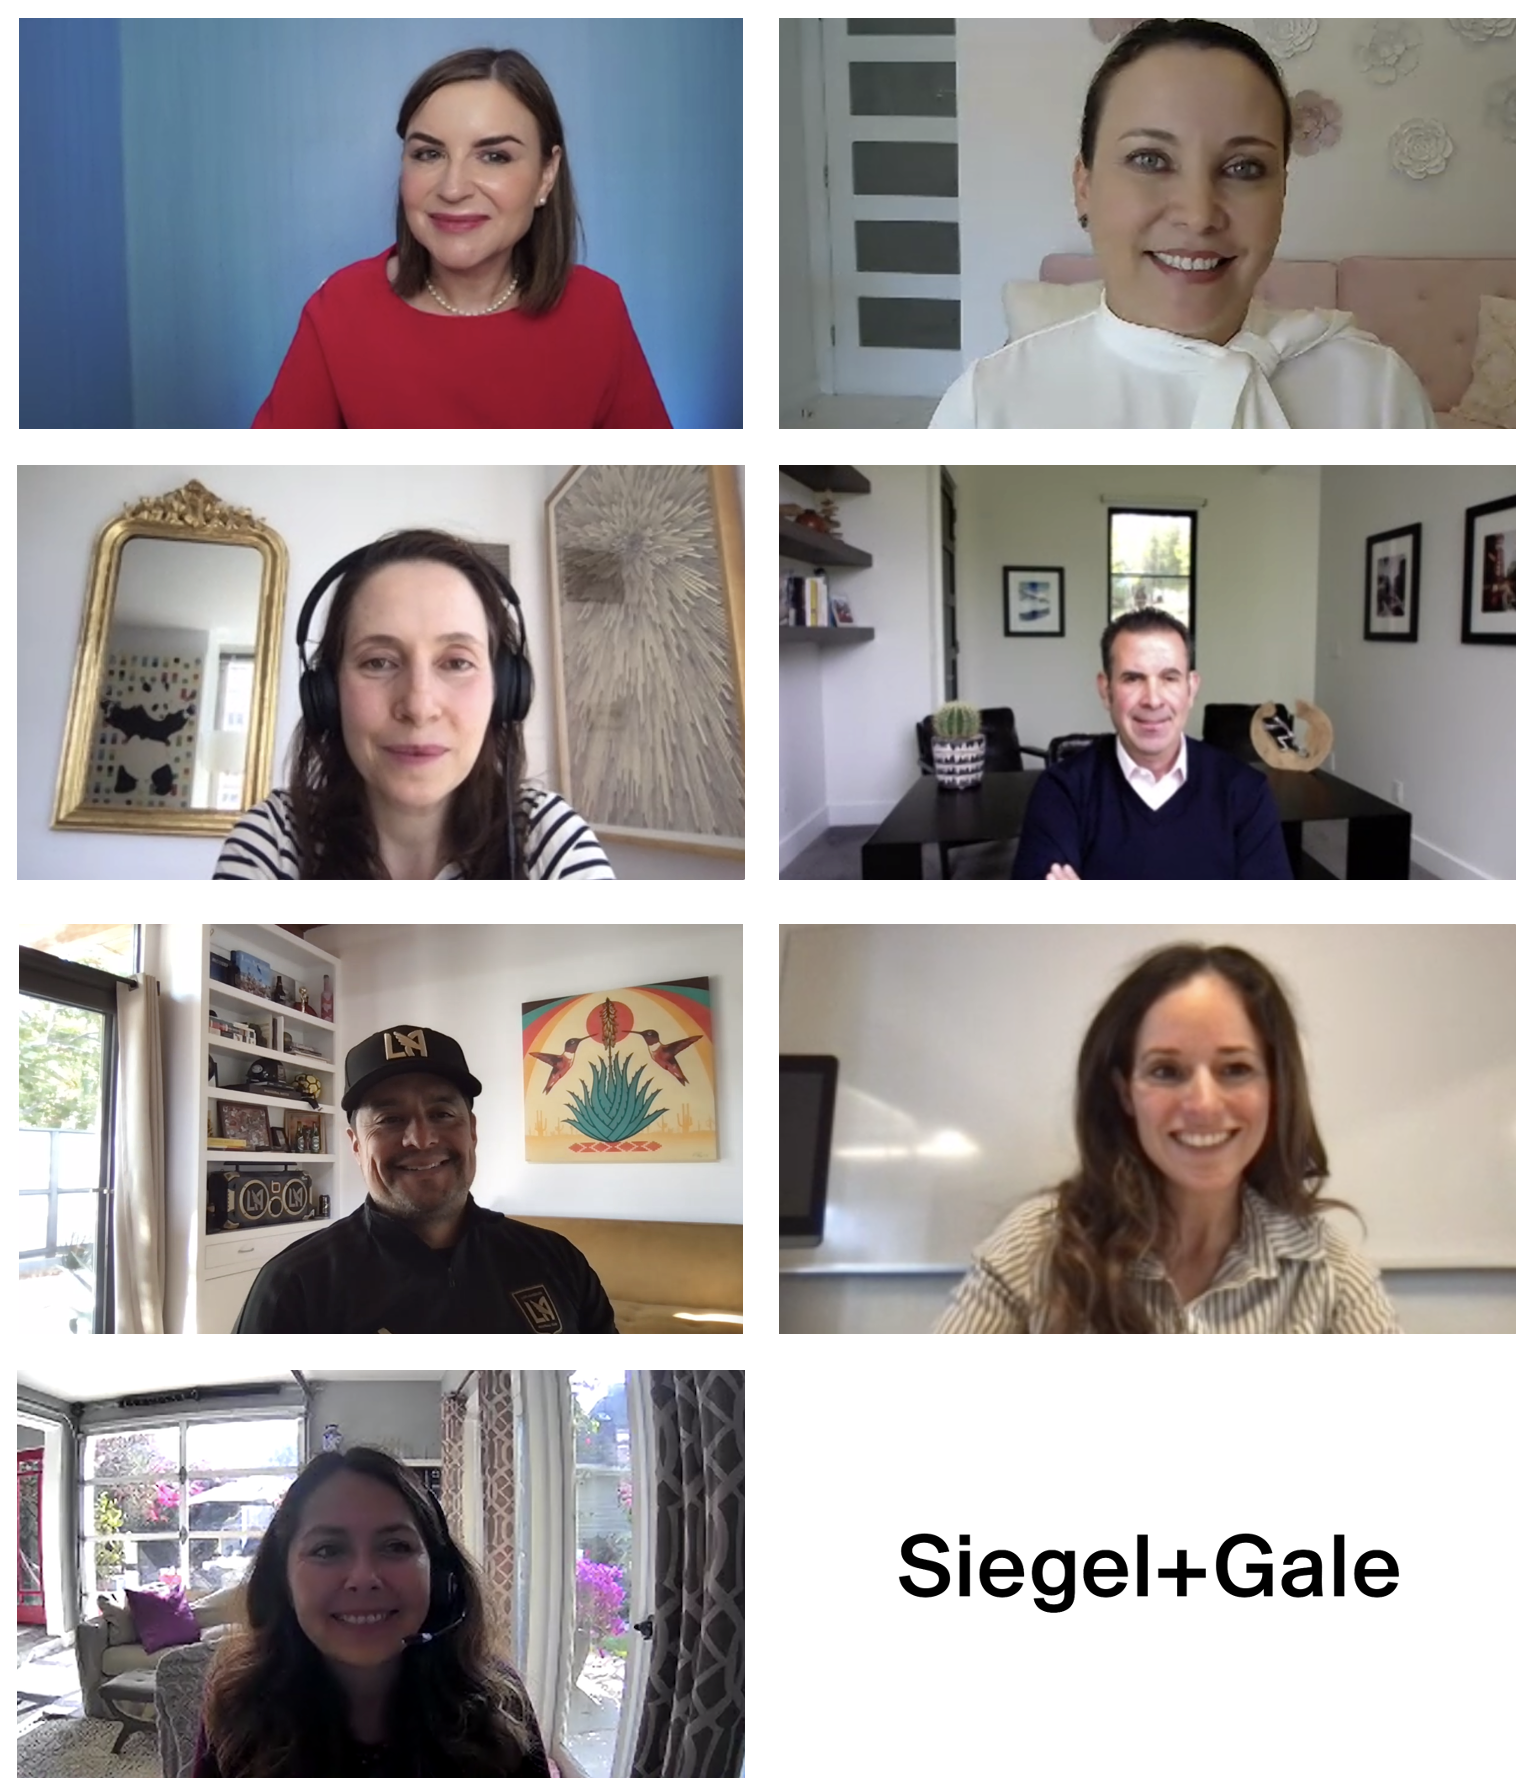 Siegel+Gale's Global CMO, Margaret Molloy, and 6 marketing leaders on Hispanic Heritage Month and Inclusive Storytelling